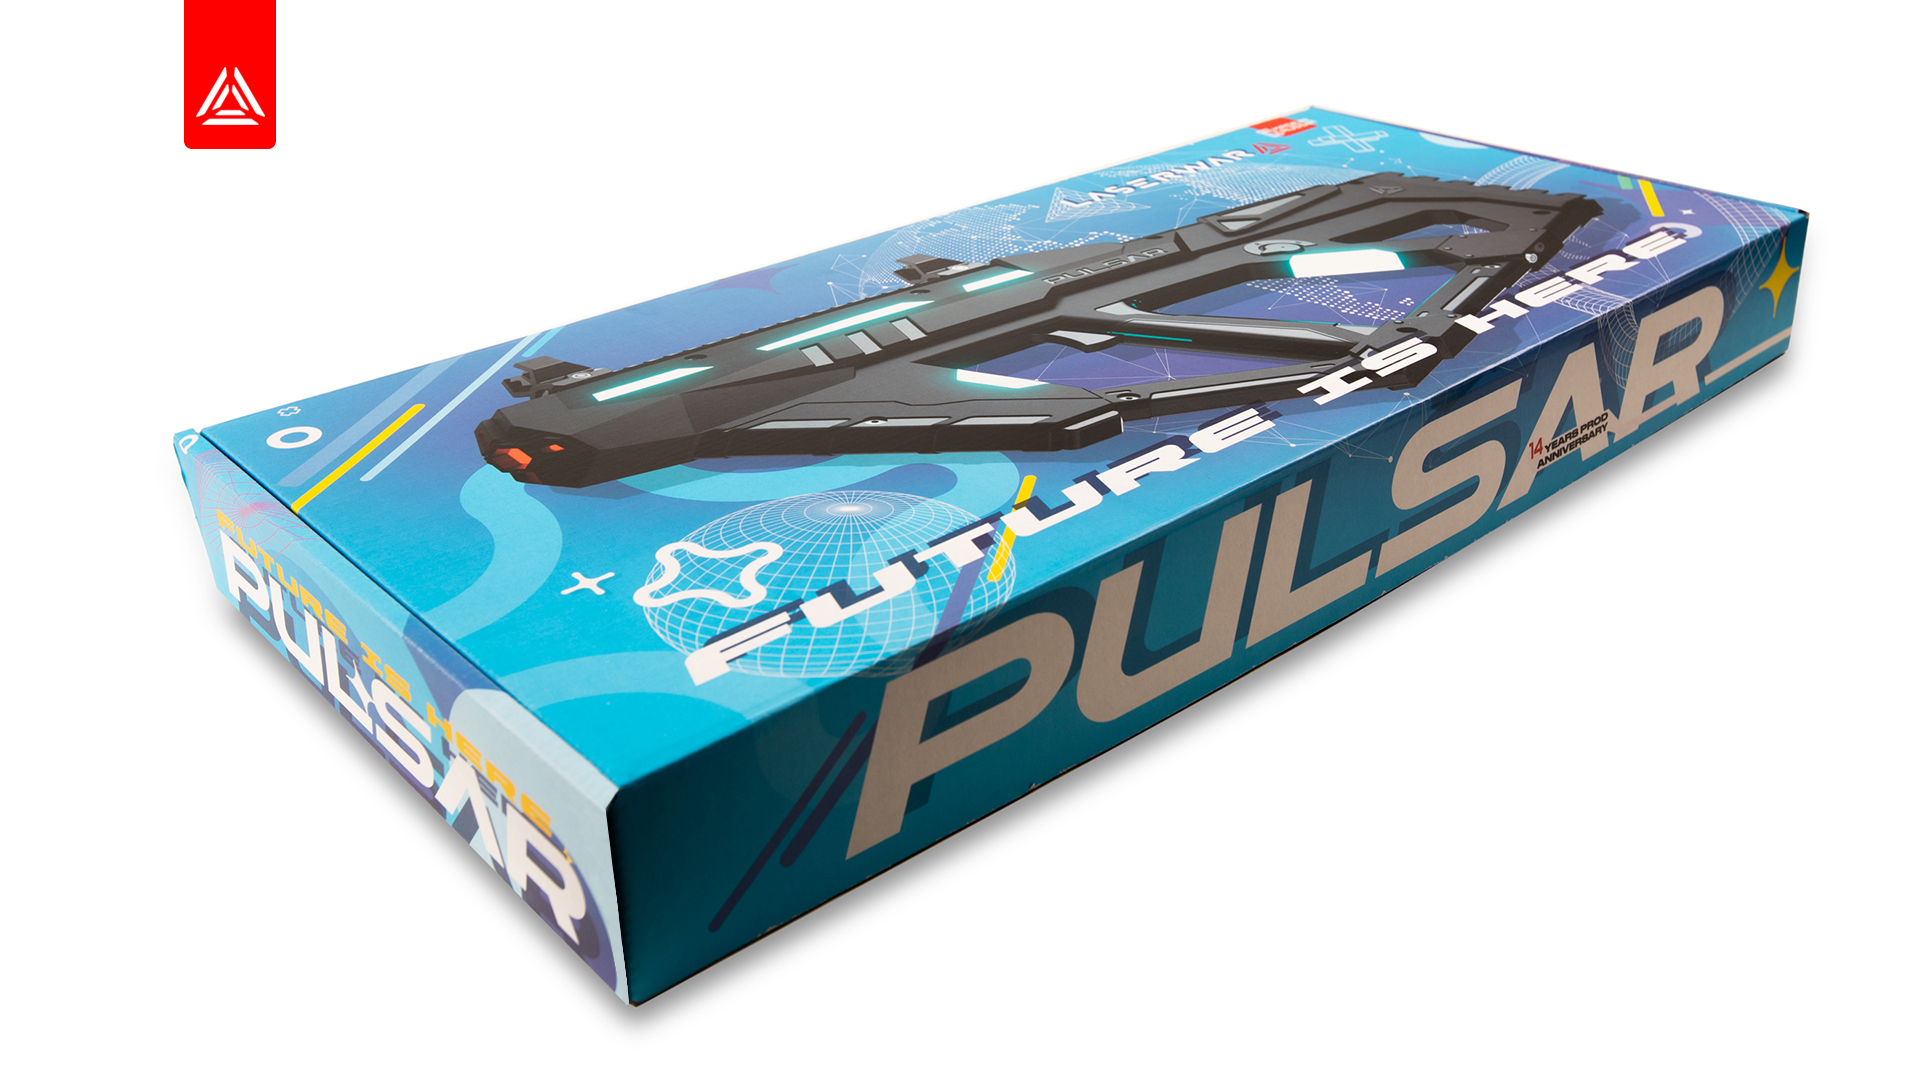 "Pulsar" tagger packed in a new bombastic box!